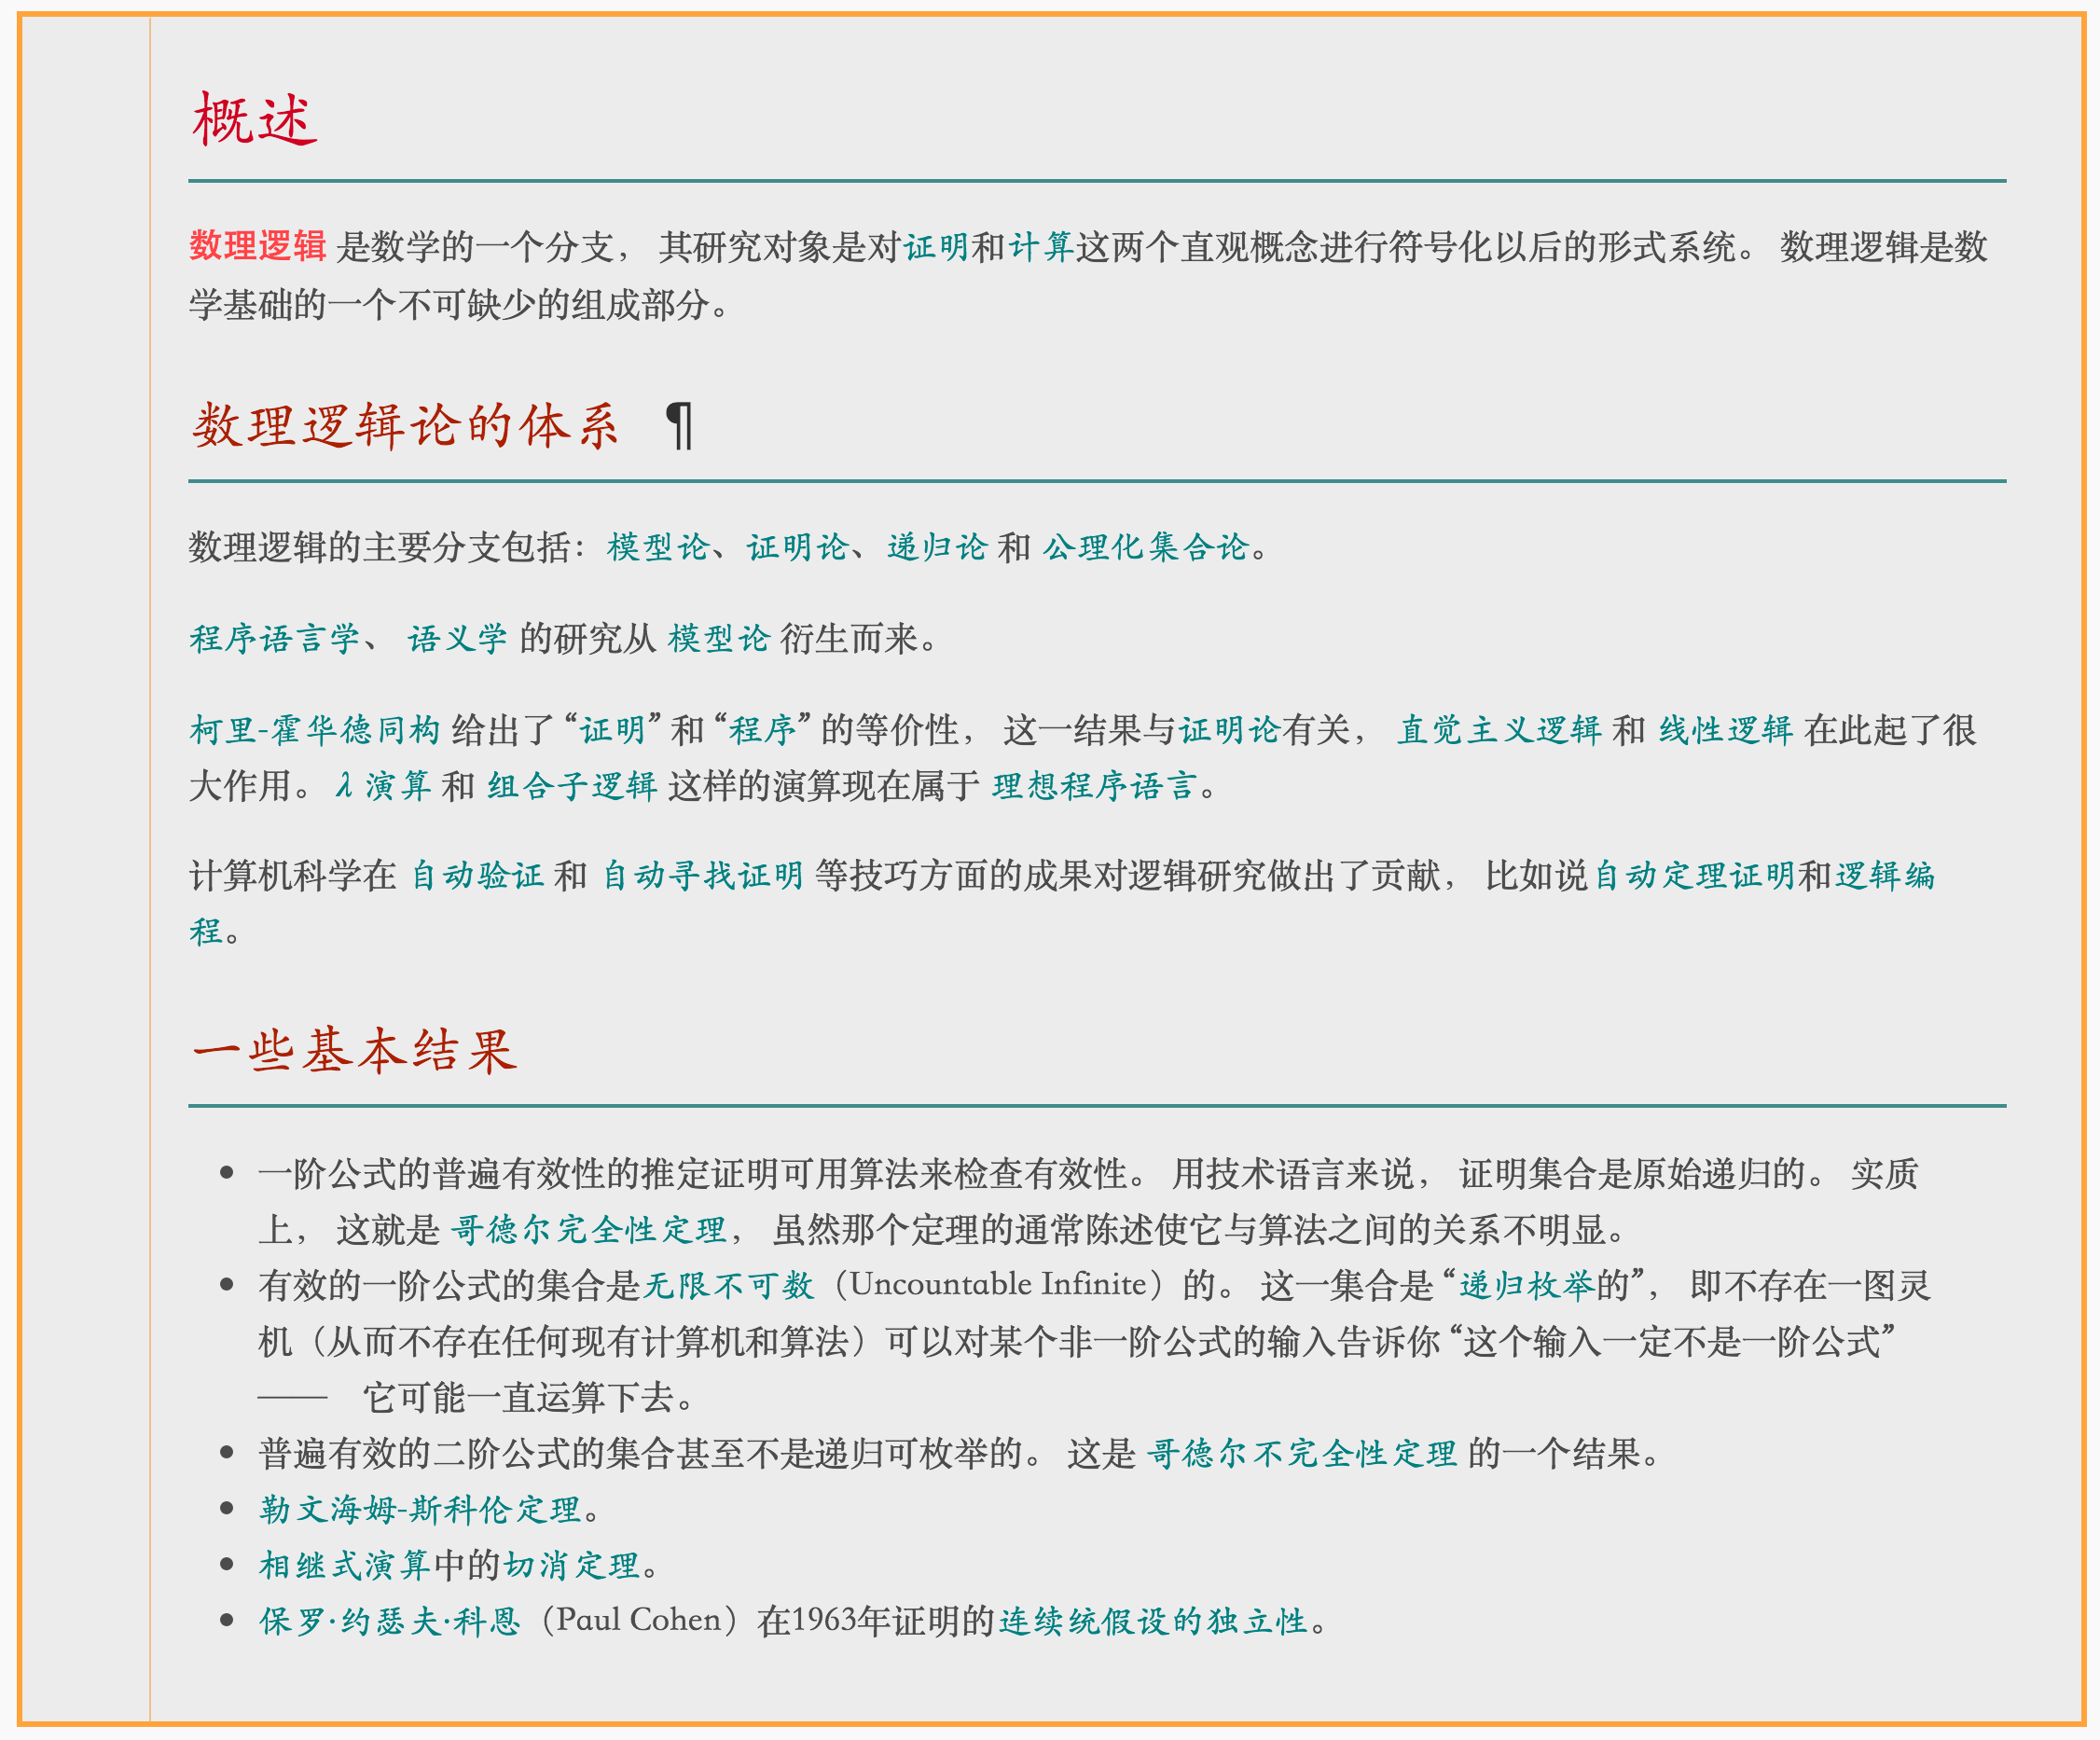 Figure: Notebook Chinese paragraphs.